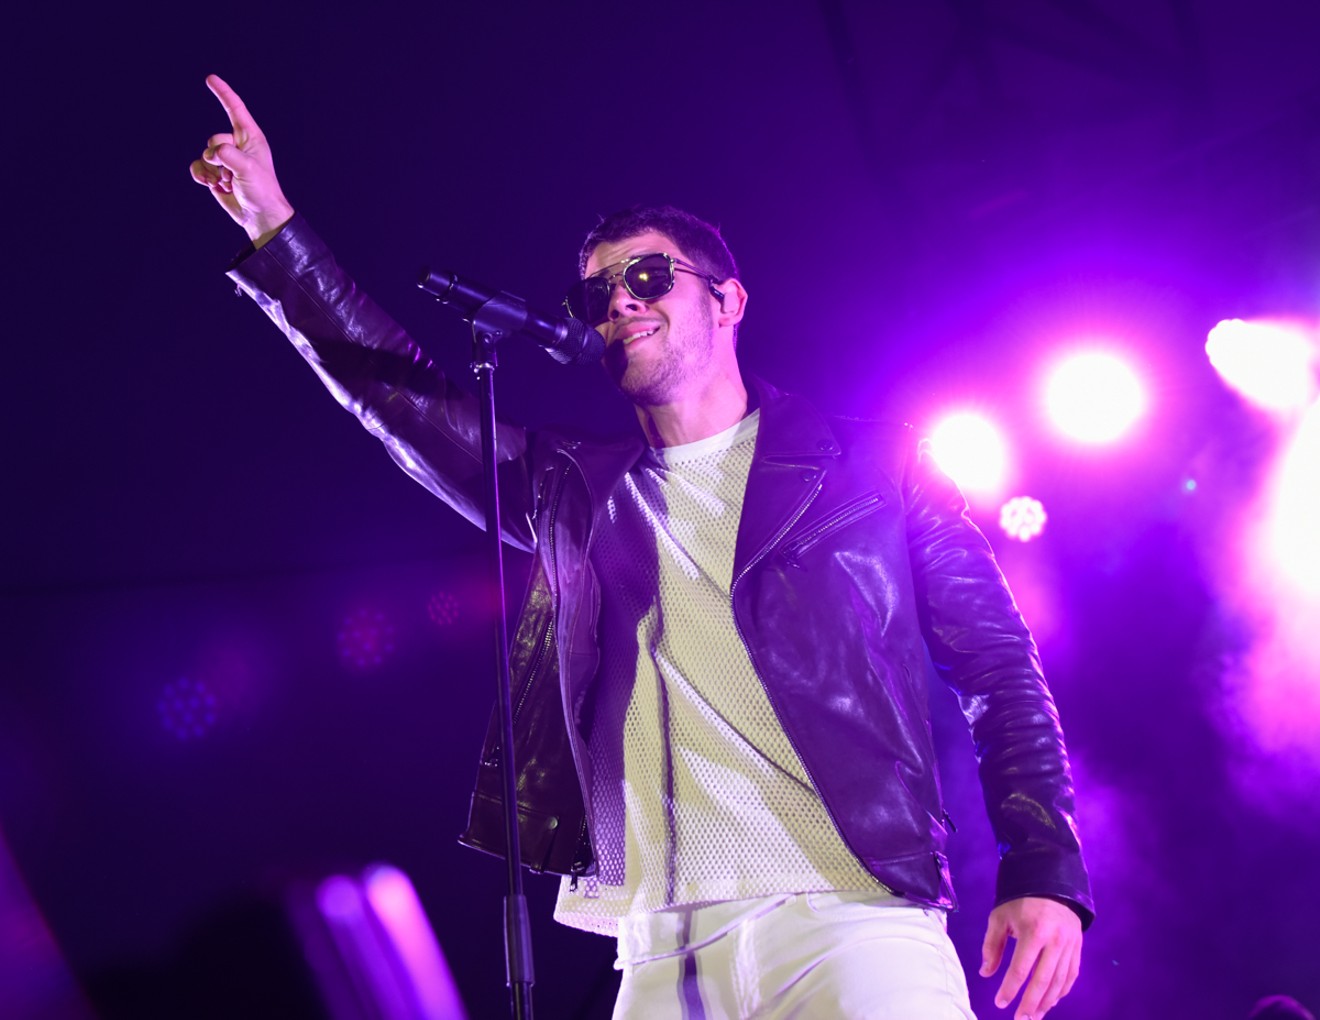 Nick Jonas. See more photos from SunFest 2018 here.